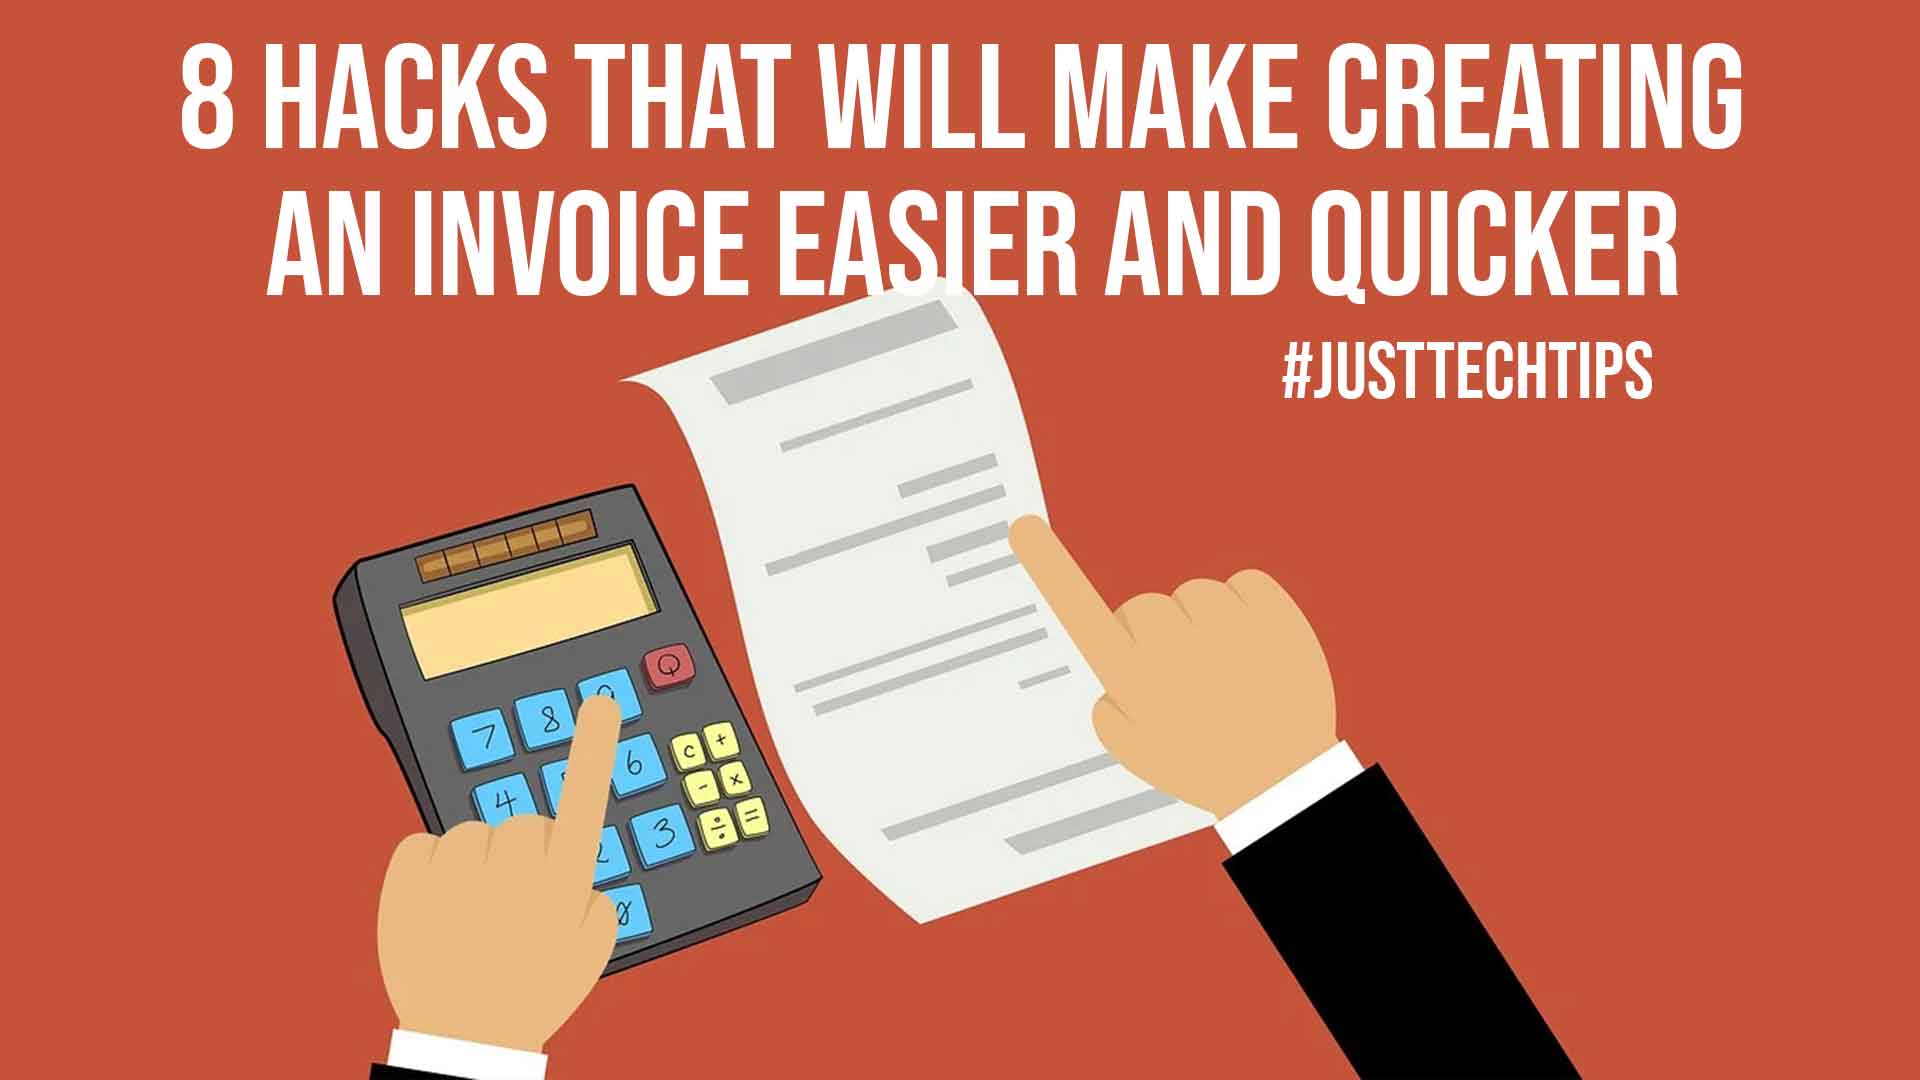 8 Hacks That Will Make Creating An Invoice Easier And Quicker